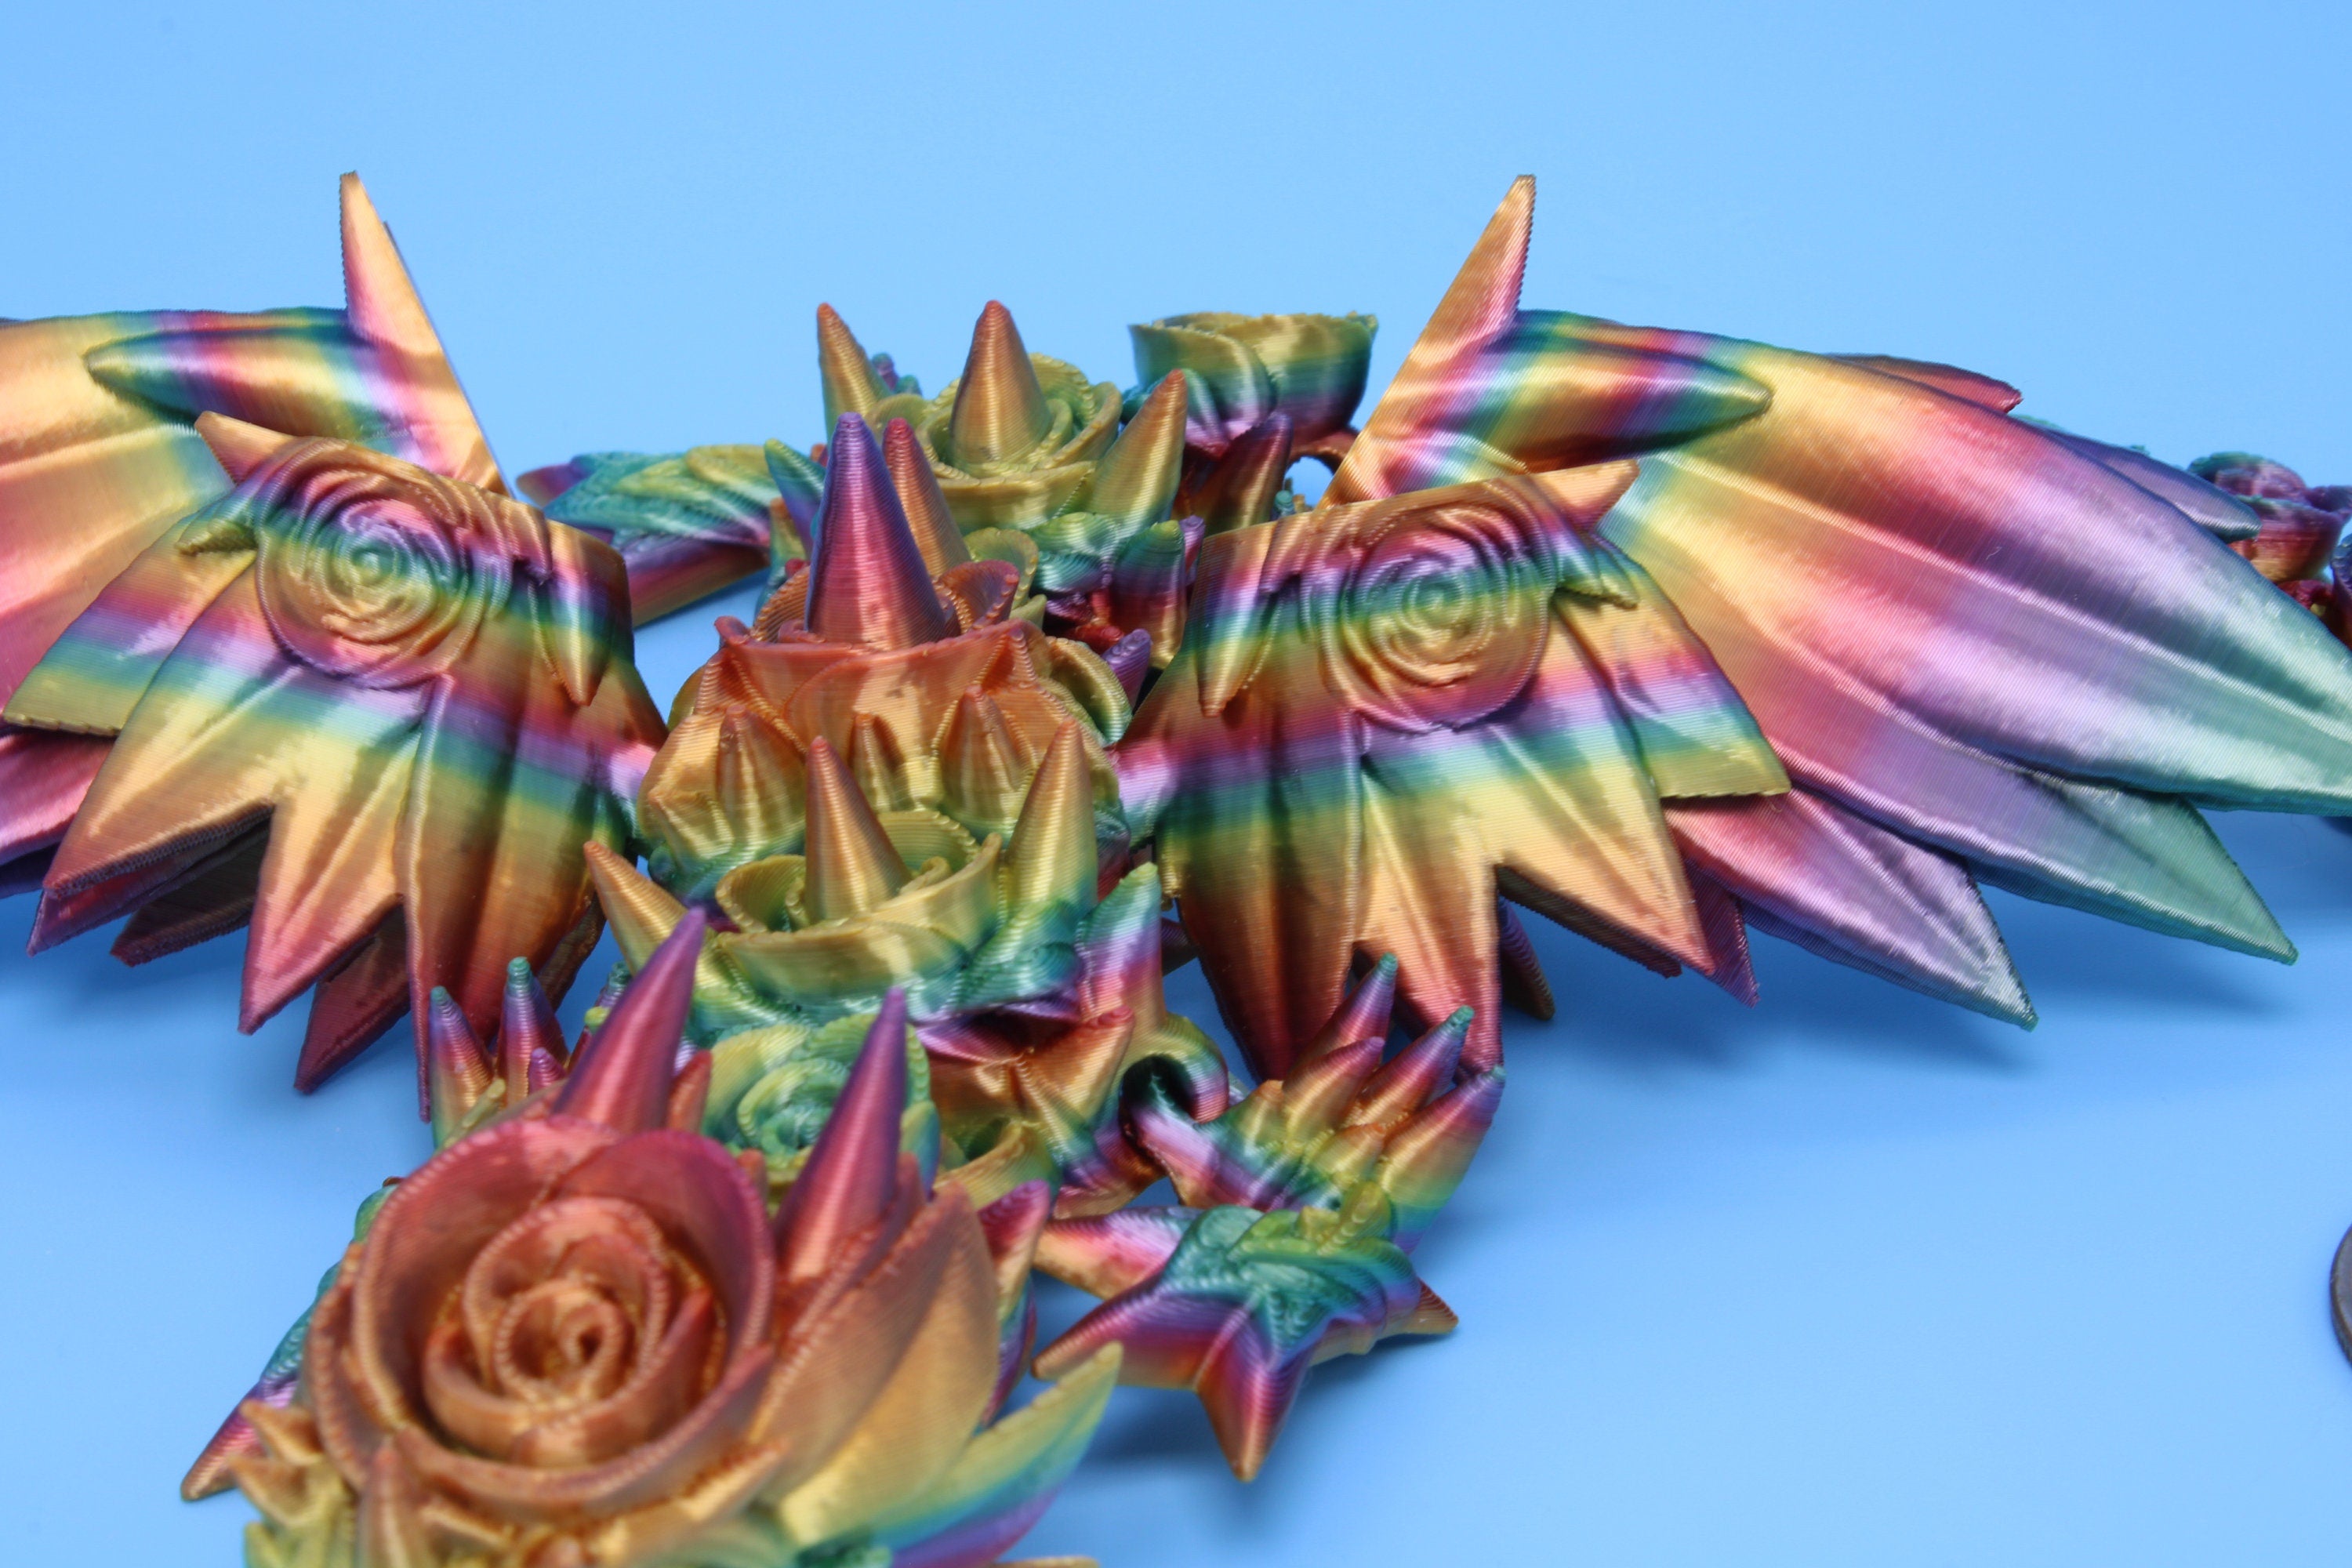 Baby Rose Wing Dragon | Rainbow | 3D Printed | Fidget | Flexi Toy 8.5 in. | Stress Relief Gift